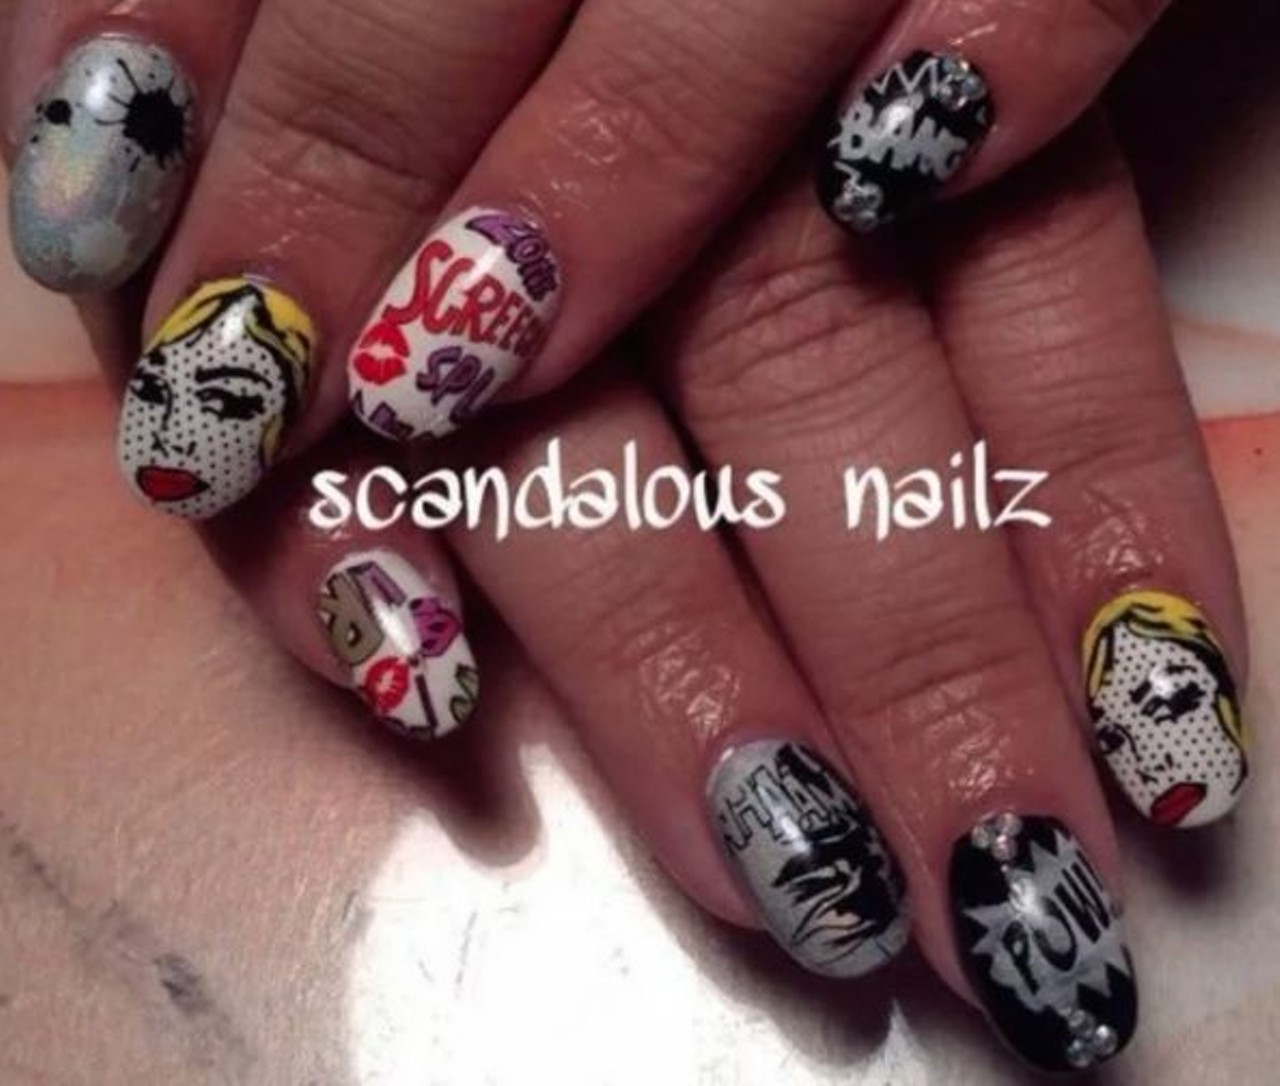  scandalous_nailz
(216) 255-0446 (Text only)
Johanna Cashtro is a home-based licensed nail technician who takes in-advance appointments only. For new clients, a $20 deposit is required.
Photo via scandalous_nailz/Instagram